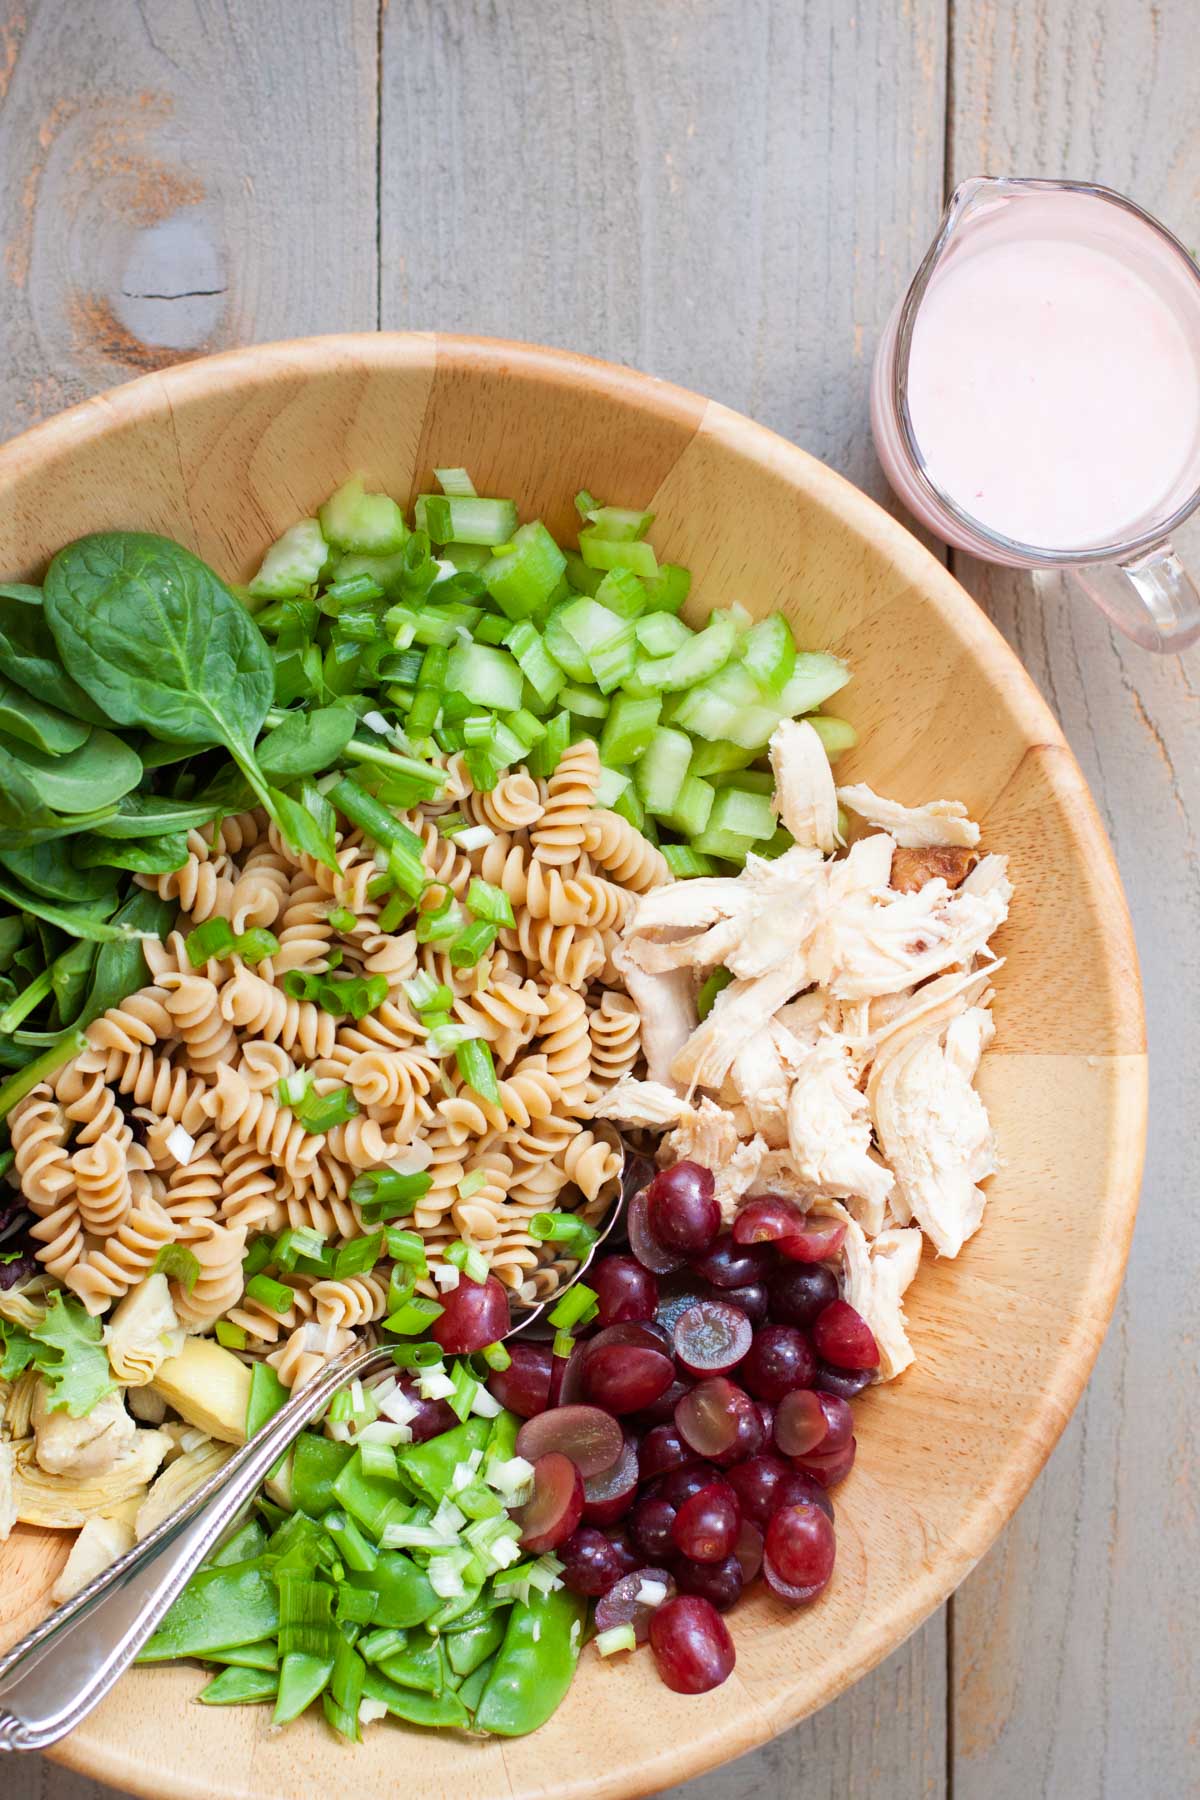 The ingredients for the pasta salad are in a mixing bowl with a pitcher of dressing on the side.